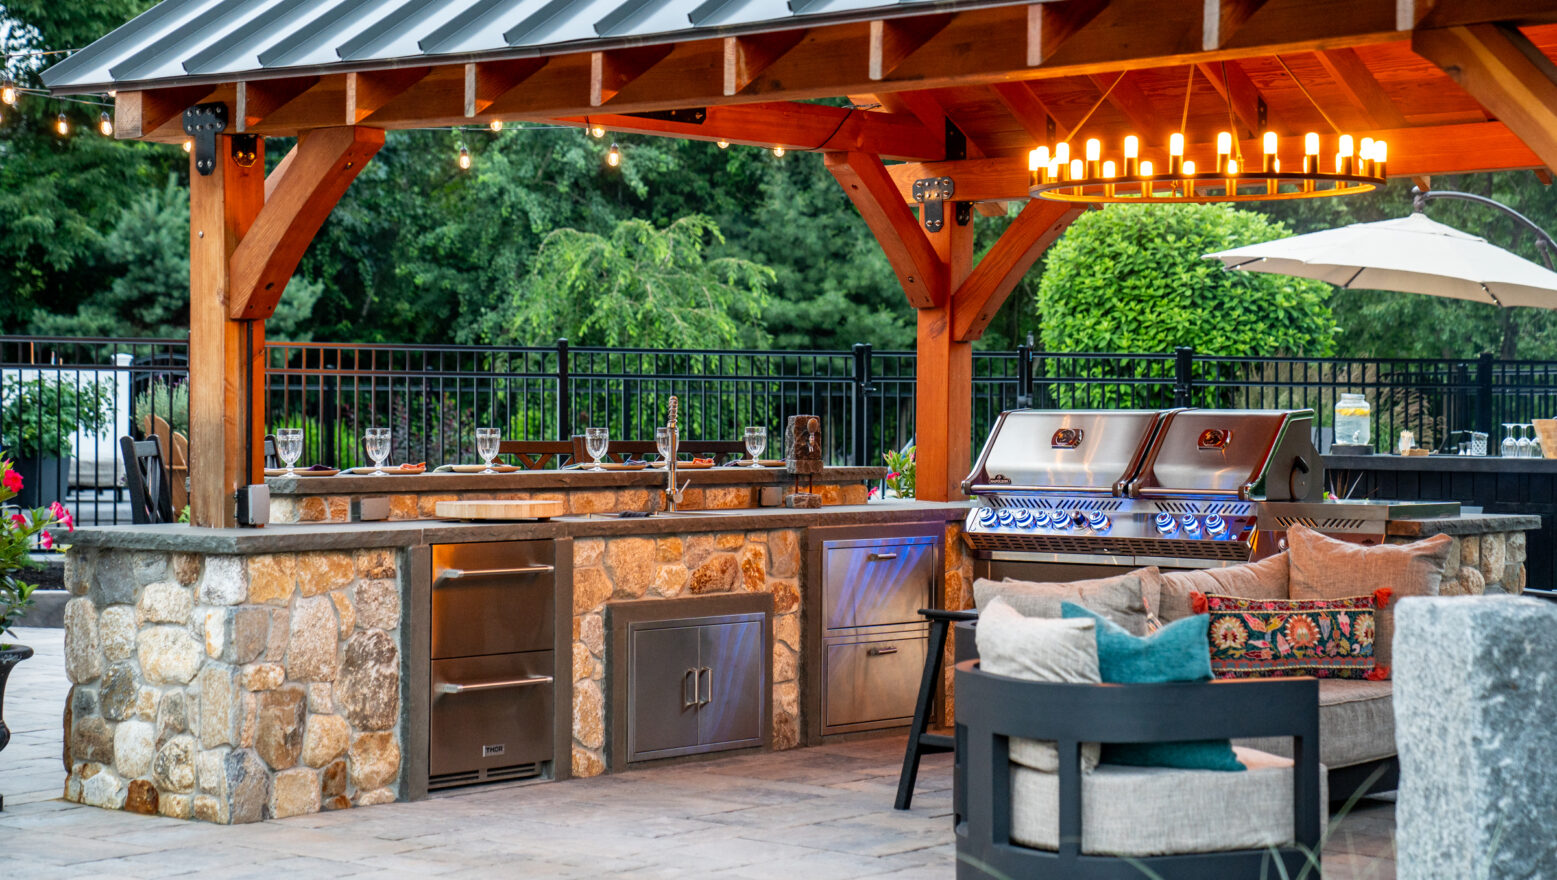 The outdoor kitchen under the client built pergola was furnished with professional grade appliances. New England Rounds stone veneer was used to build the kitchen.